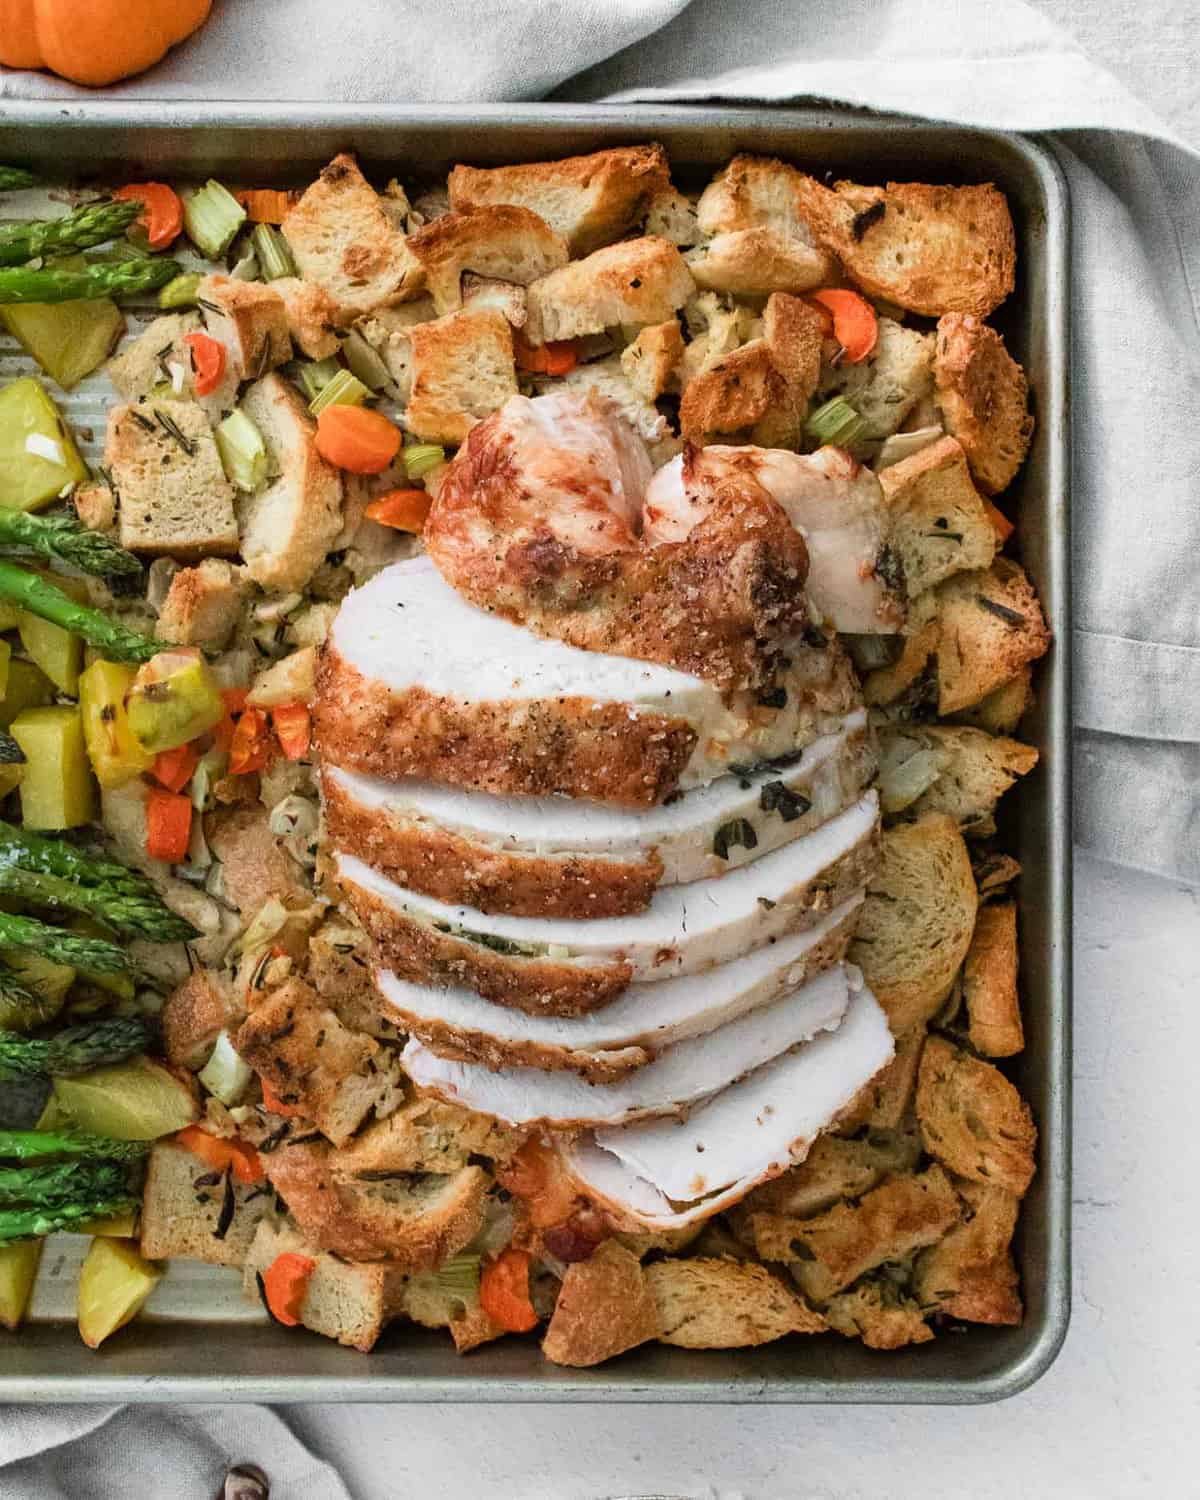 Turkey breast placed on top of stuffing.